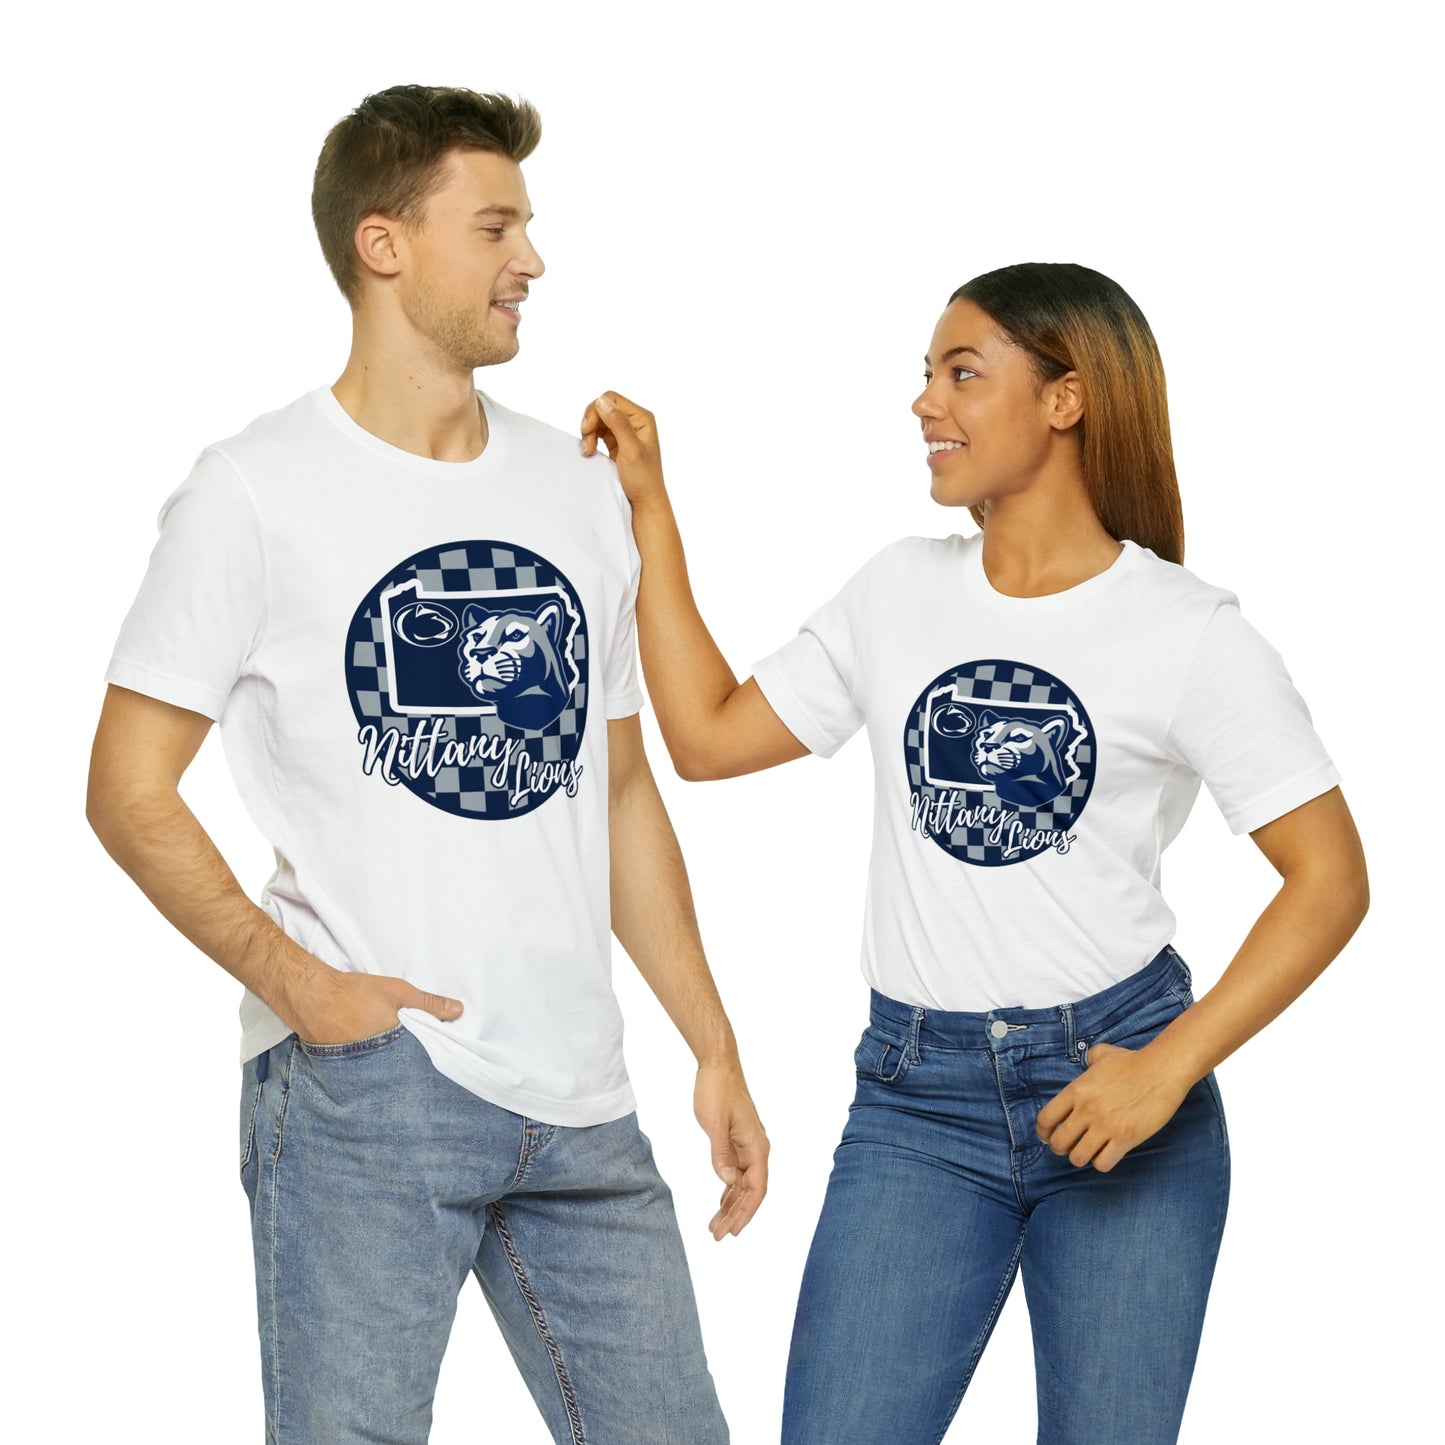 Penn State Nittany Lions Checkered Circle